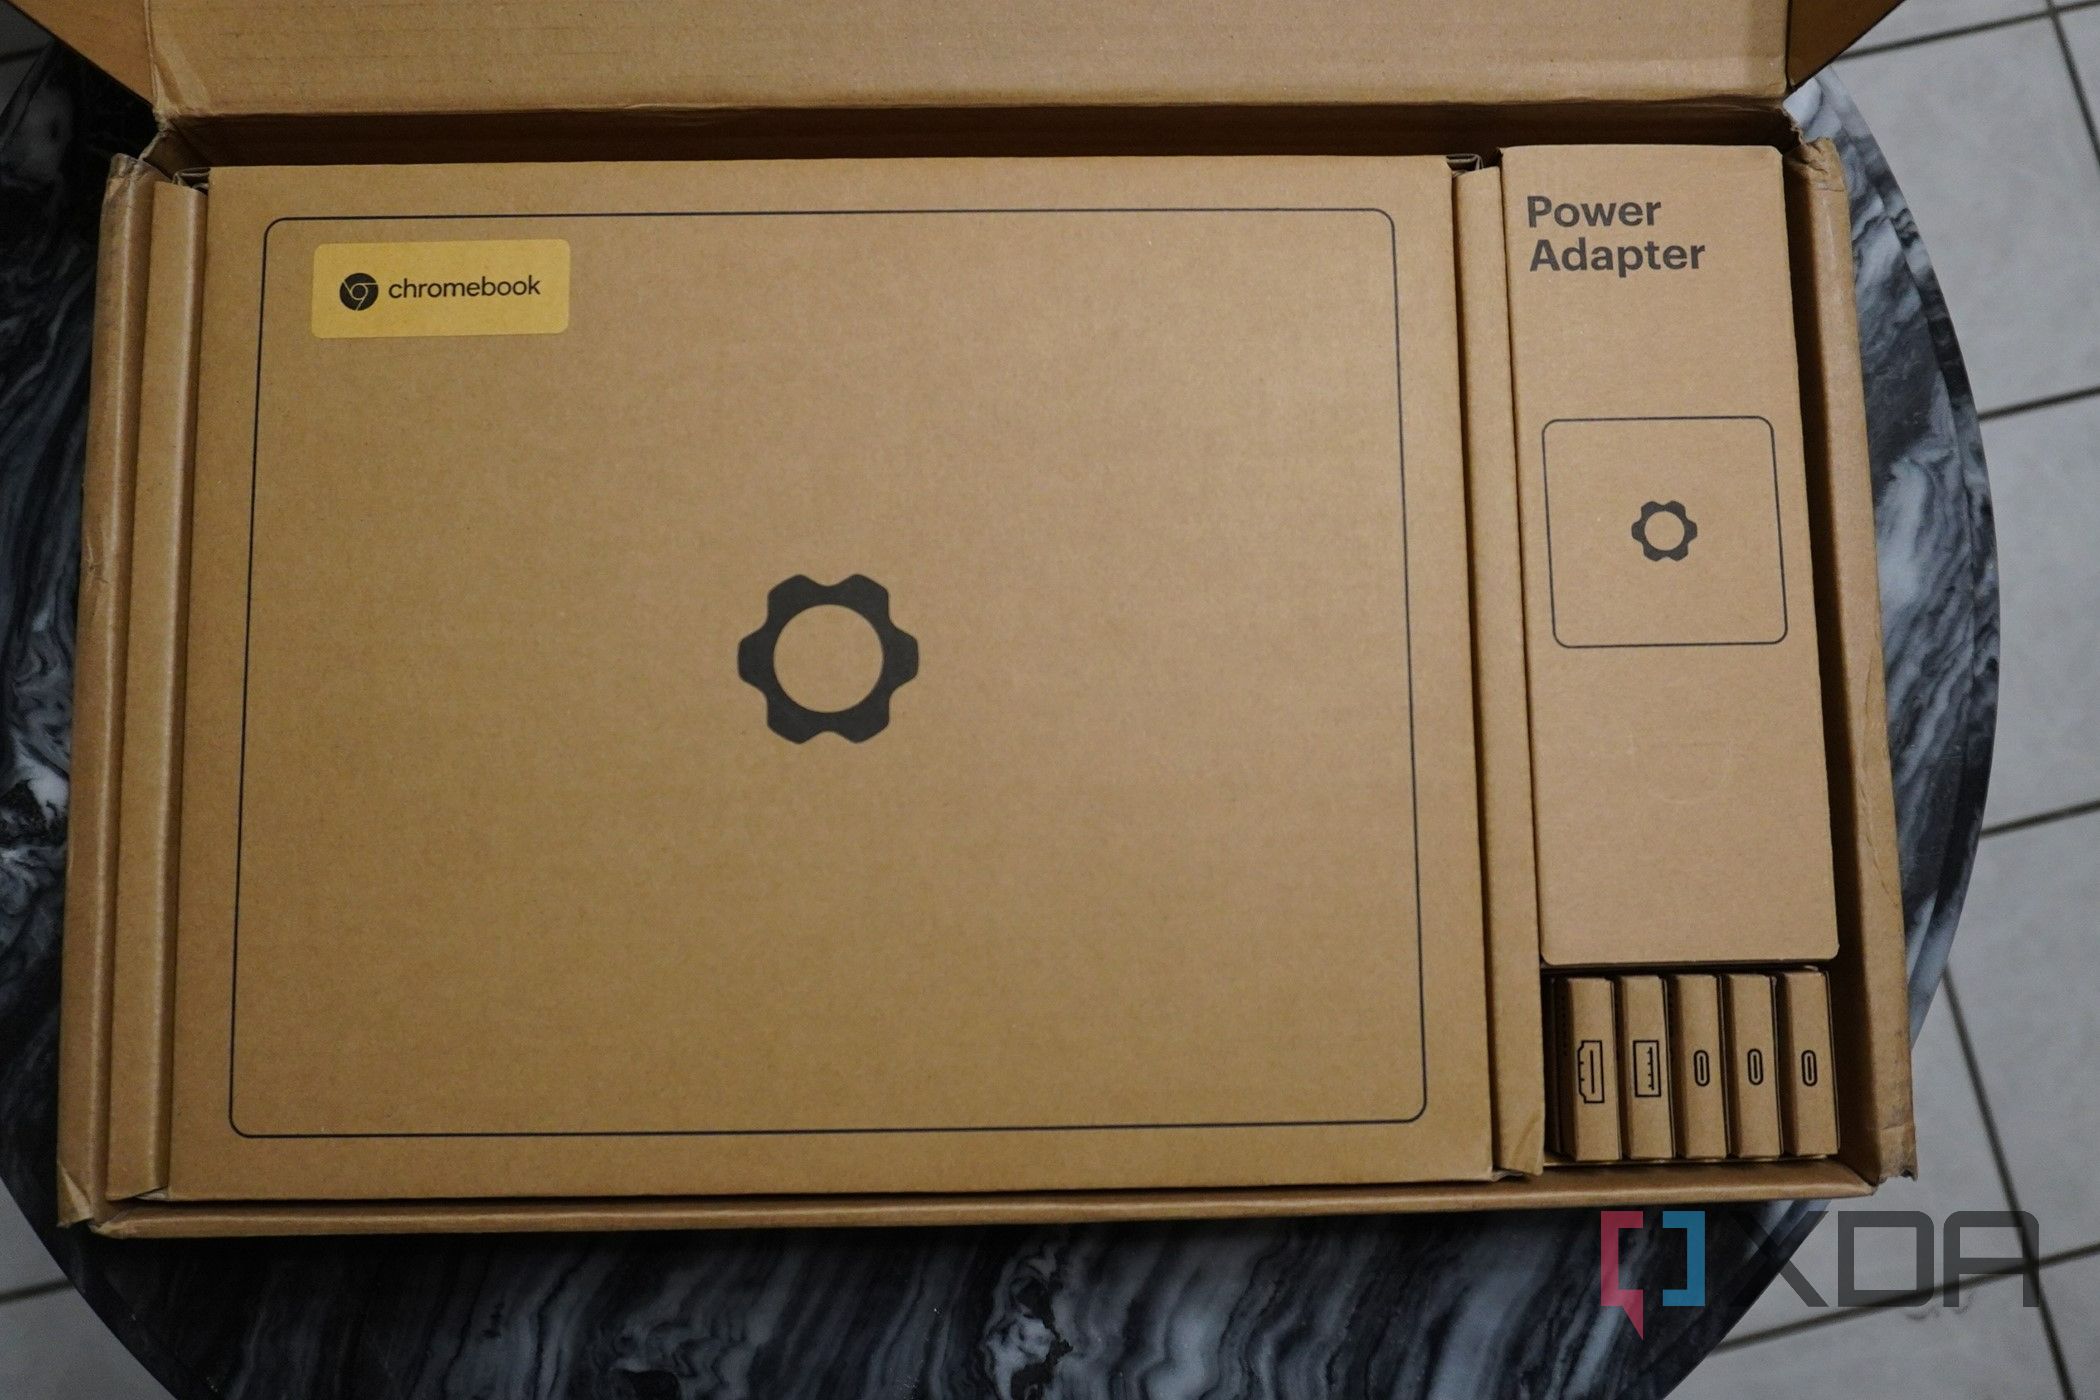 The retail box of the Framework Chromebook, with lid open.